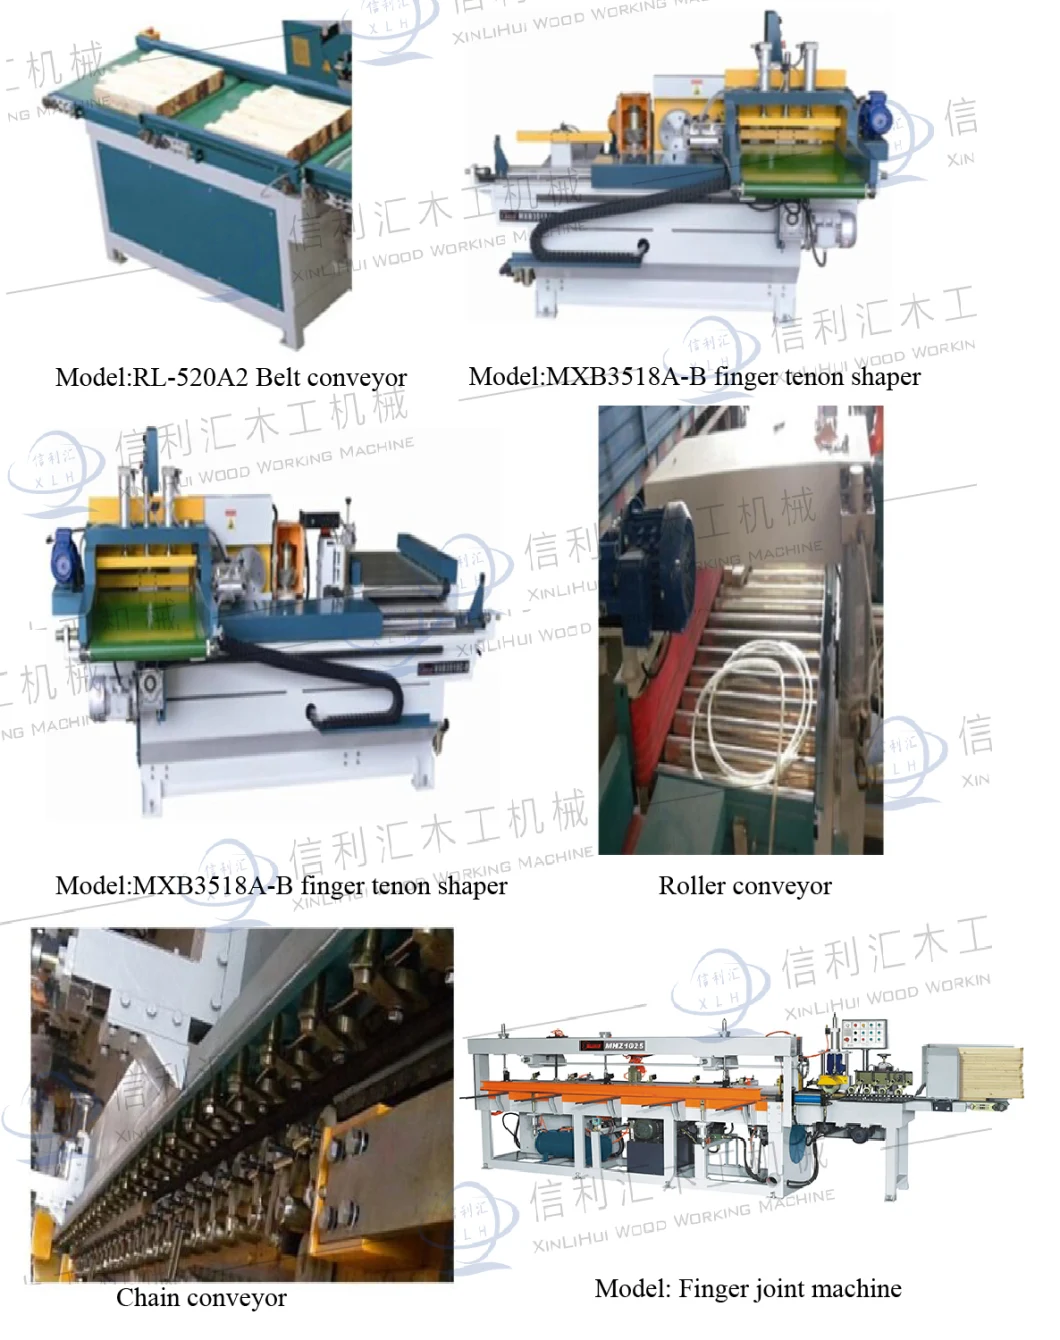 Finger Jointing Glue Spreader Wood Machinery Equipment /Finger Joint and Finger Assembly Line Edge Gluing Press Machine Wood Finger Joint Gluer